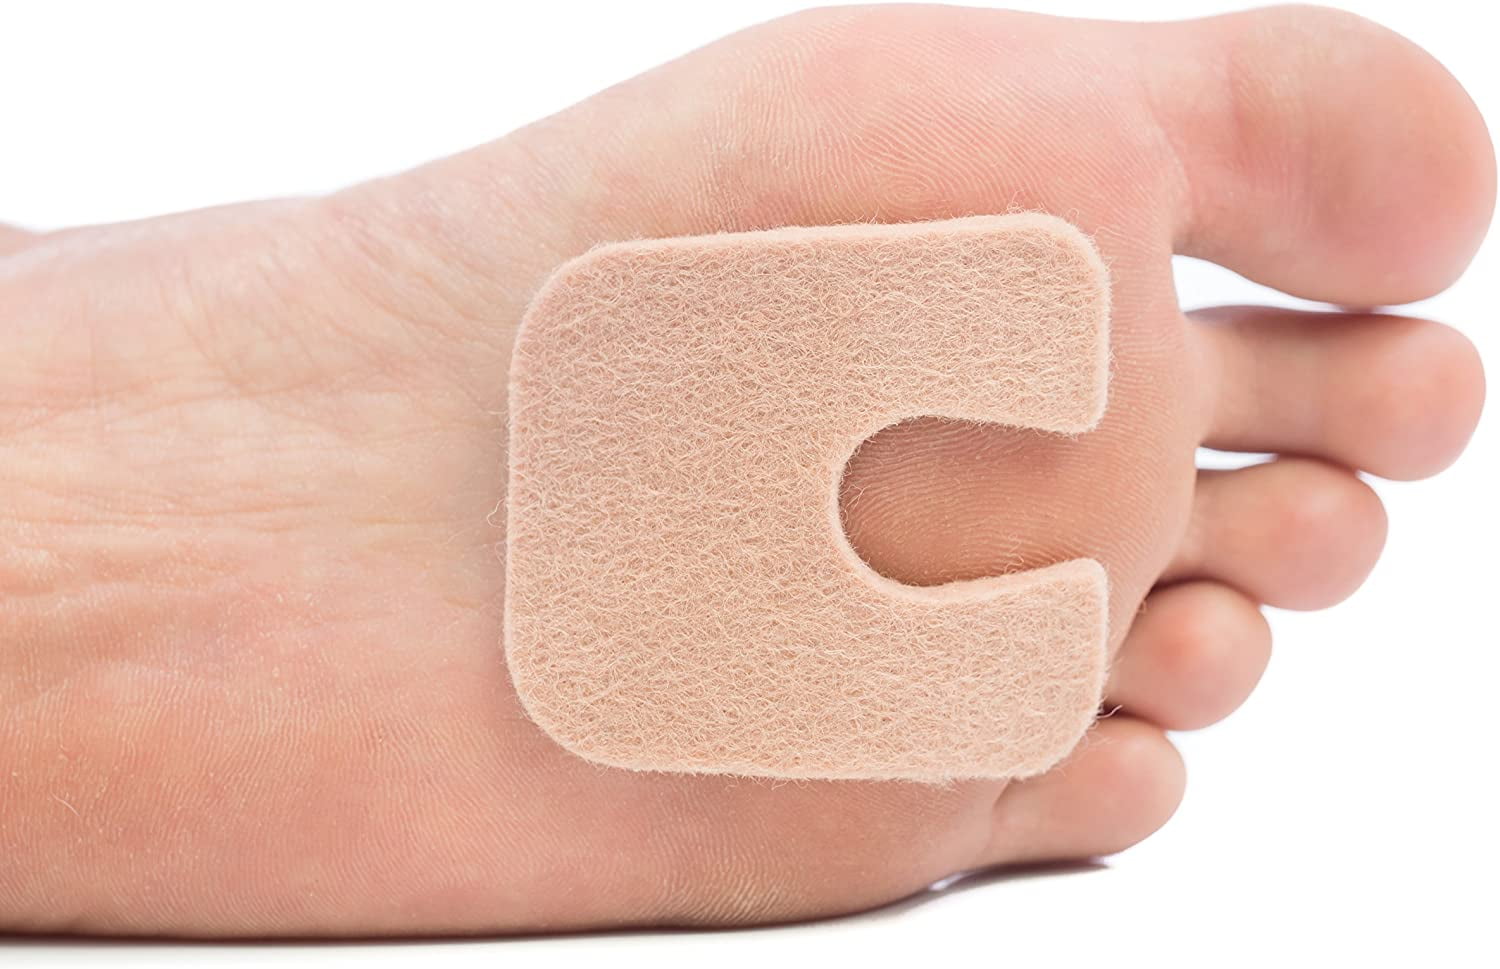 Buy Silicone Metatarsal Pads Forefoot Pad, Ball of Foot Cushions, Gel  Forefoot Cushion Pad, Soft Foot Bunion Pads Blisters Callus Pain Relief for  Women, Men Insoles for High Heels, 2 Pair Online